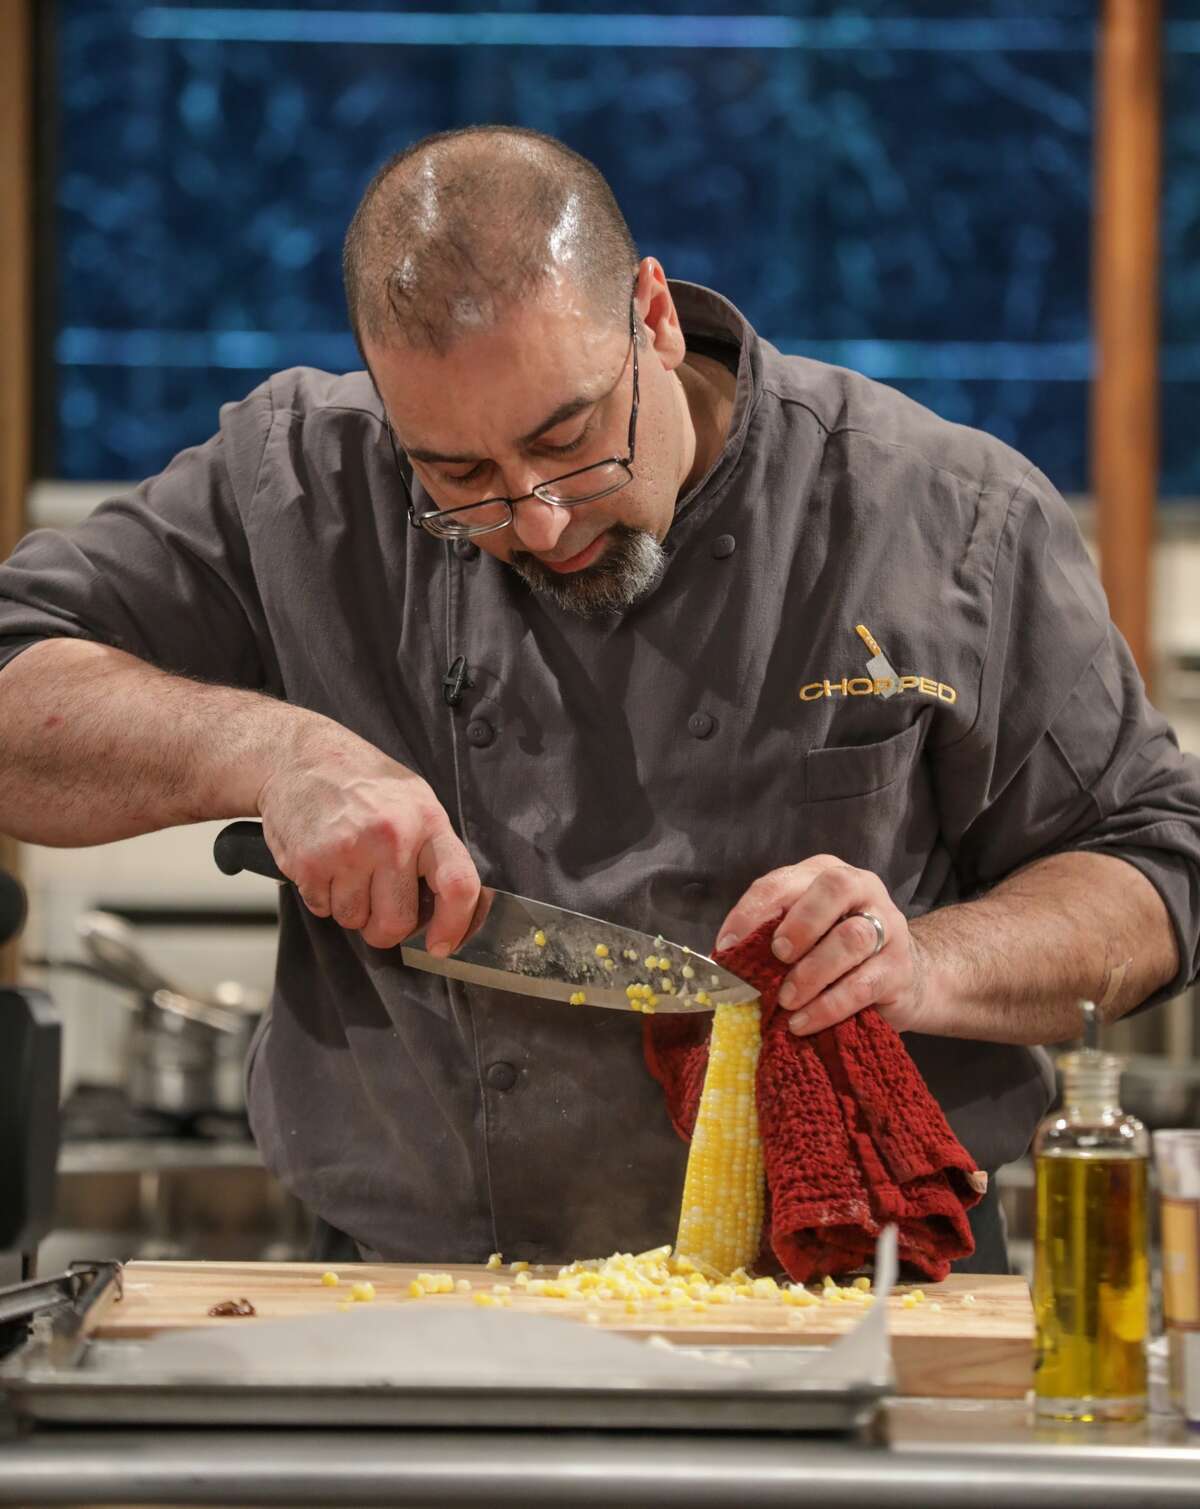 Stephen Costanzo, co-owner and head chef at Olio in Stamford prepares polenta on an episode of Food Network's "Chopped" that aired on Dec. 7, 2017. Costanzo won the competition.